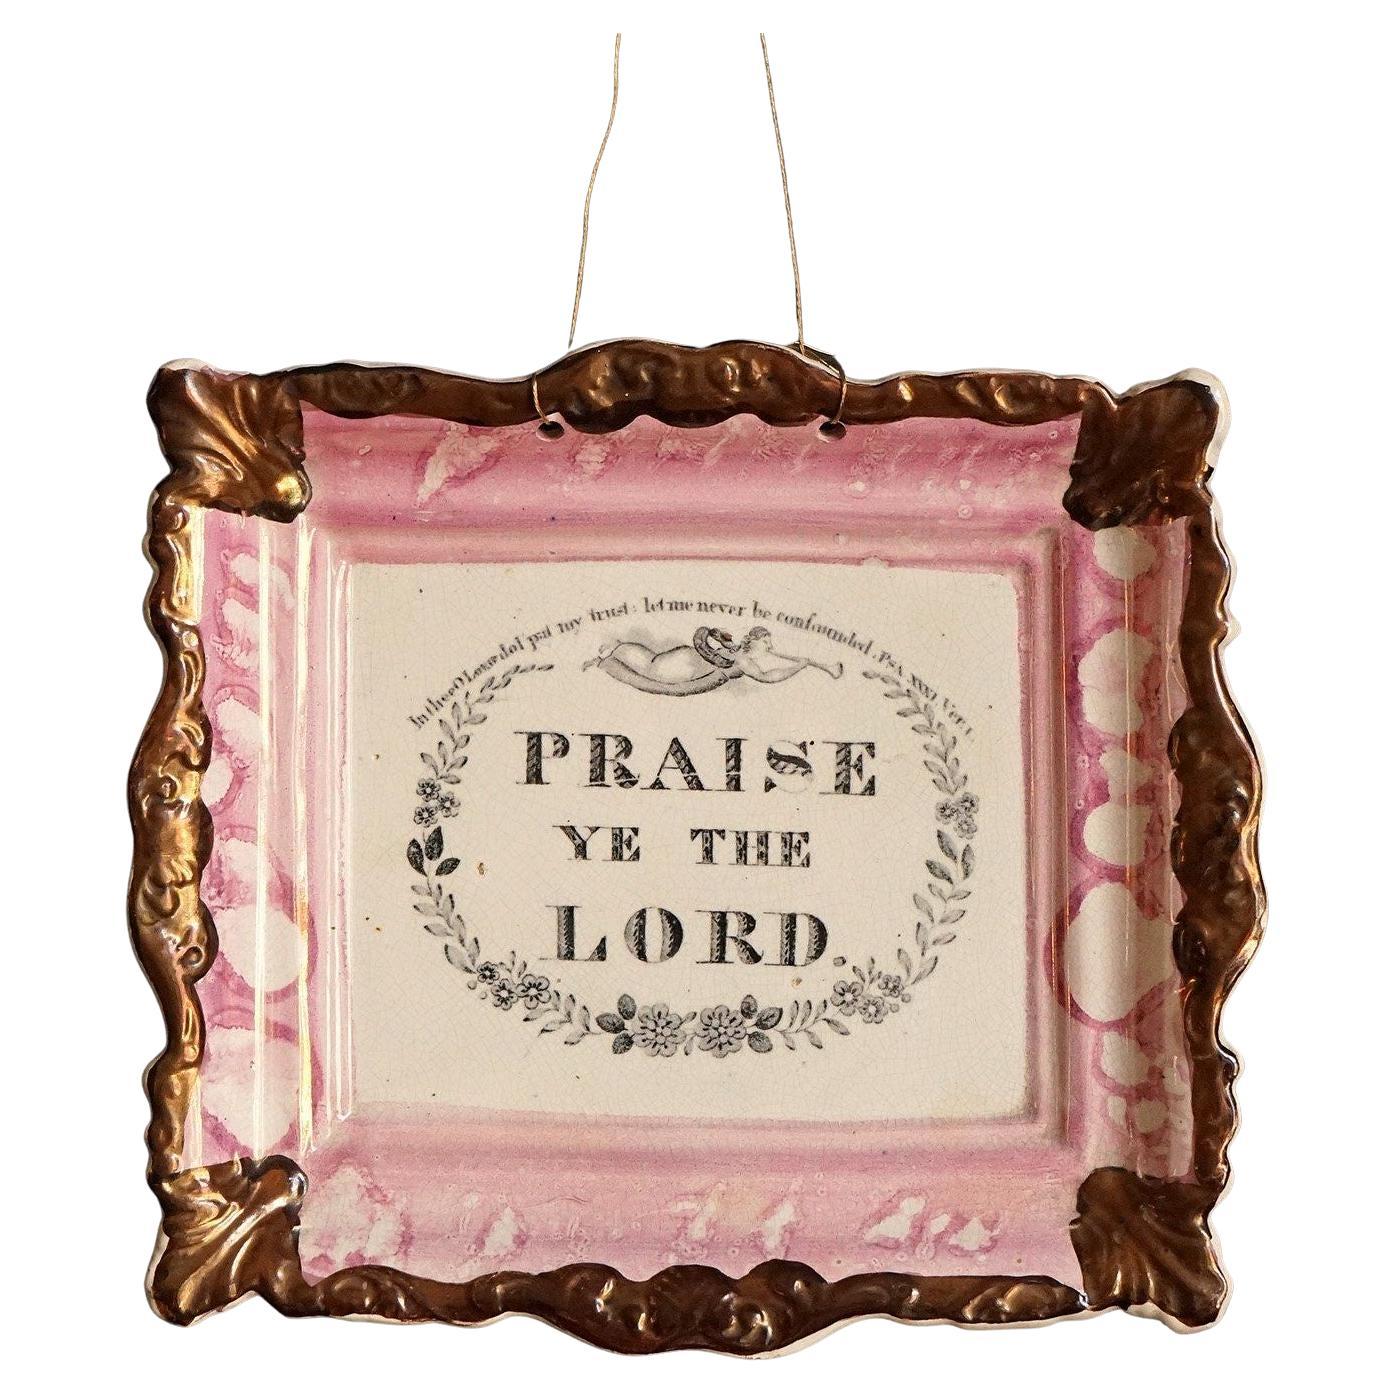 Pink Sunderland Lustre Praise Ye The Lord Pottery Plaque, Mid 19th Century